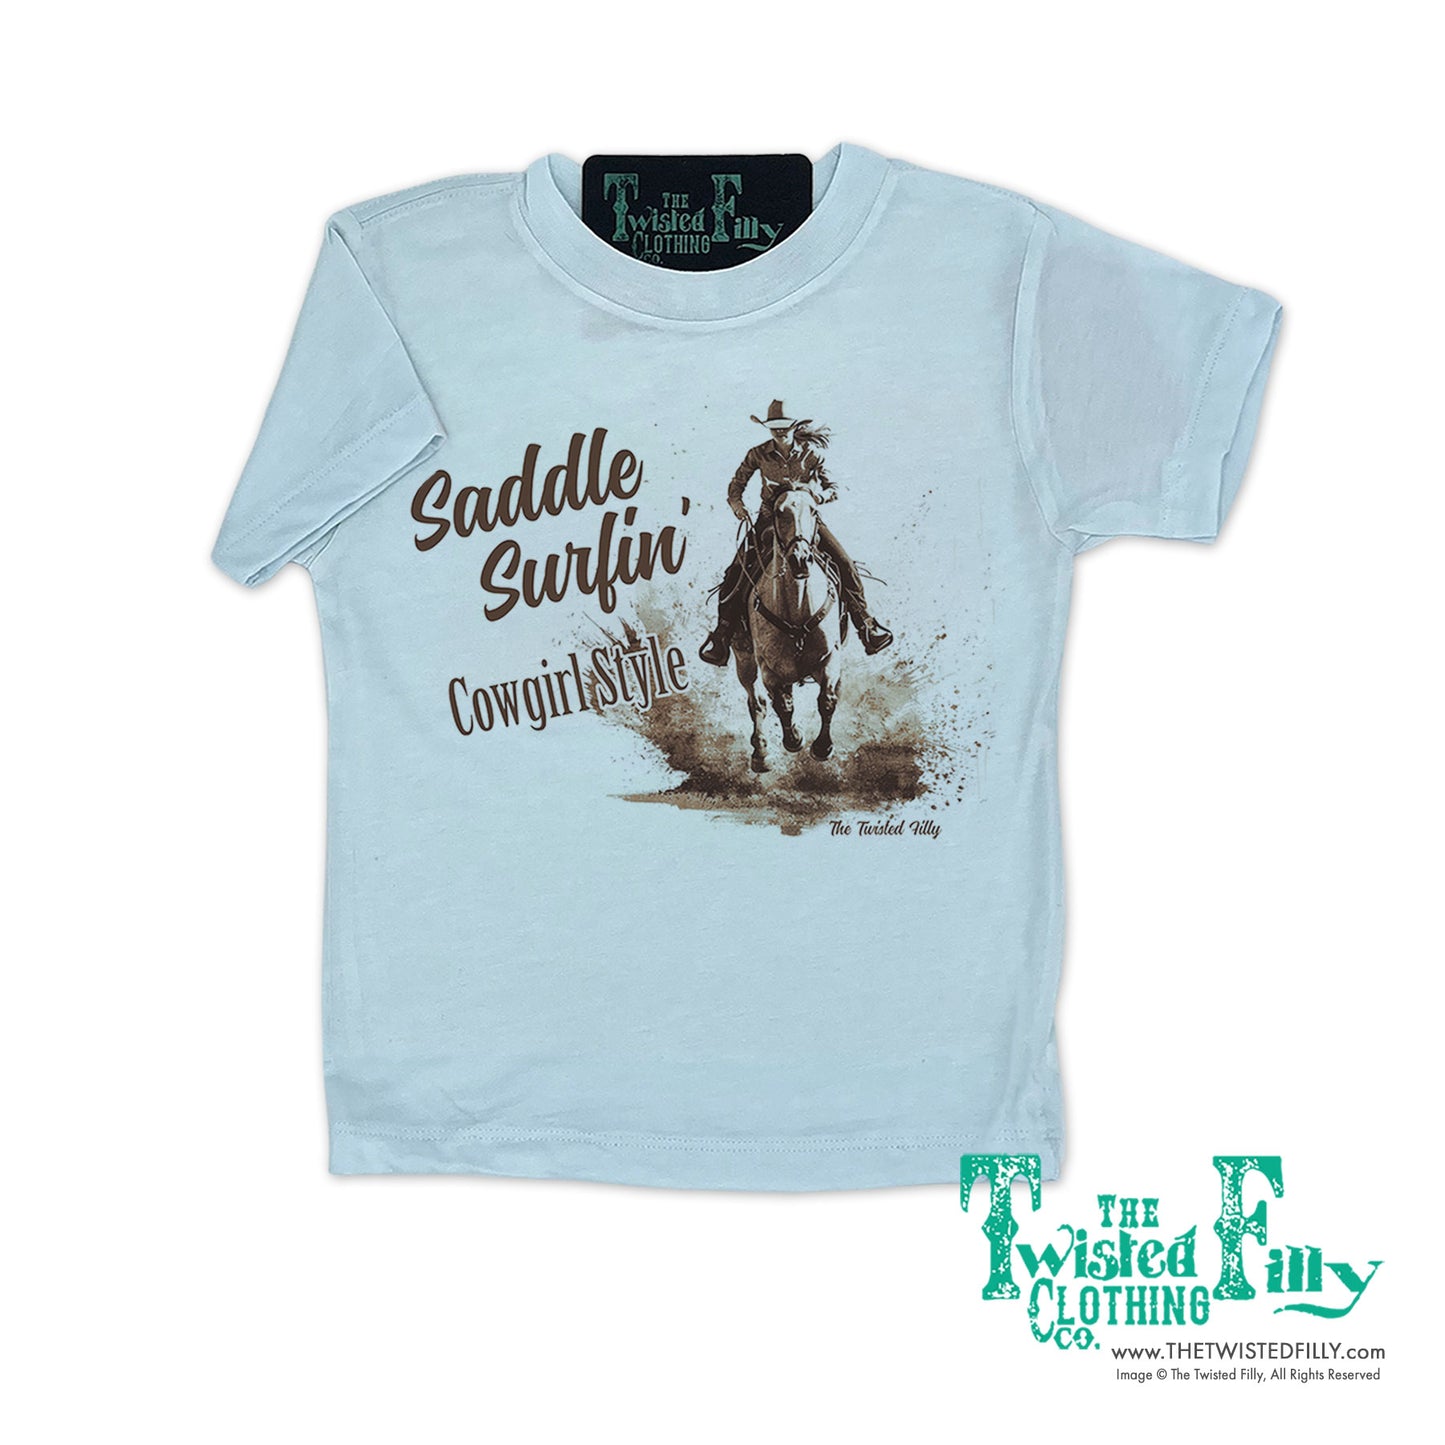 Saddle Surfin' Cowgirl Style - S/S Girls Youth Tee - Assorted Colors